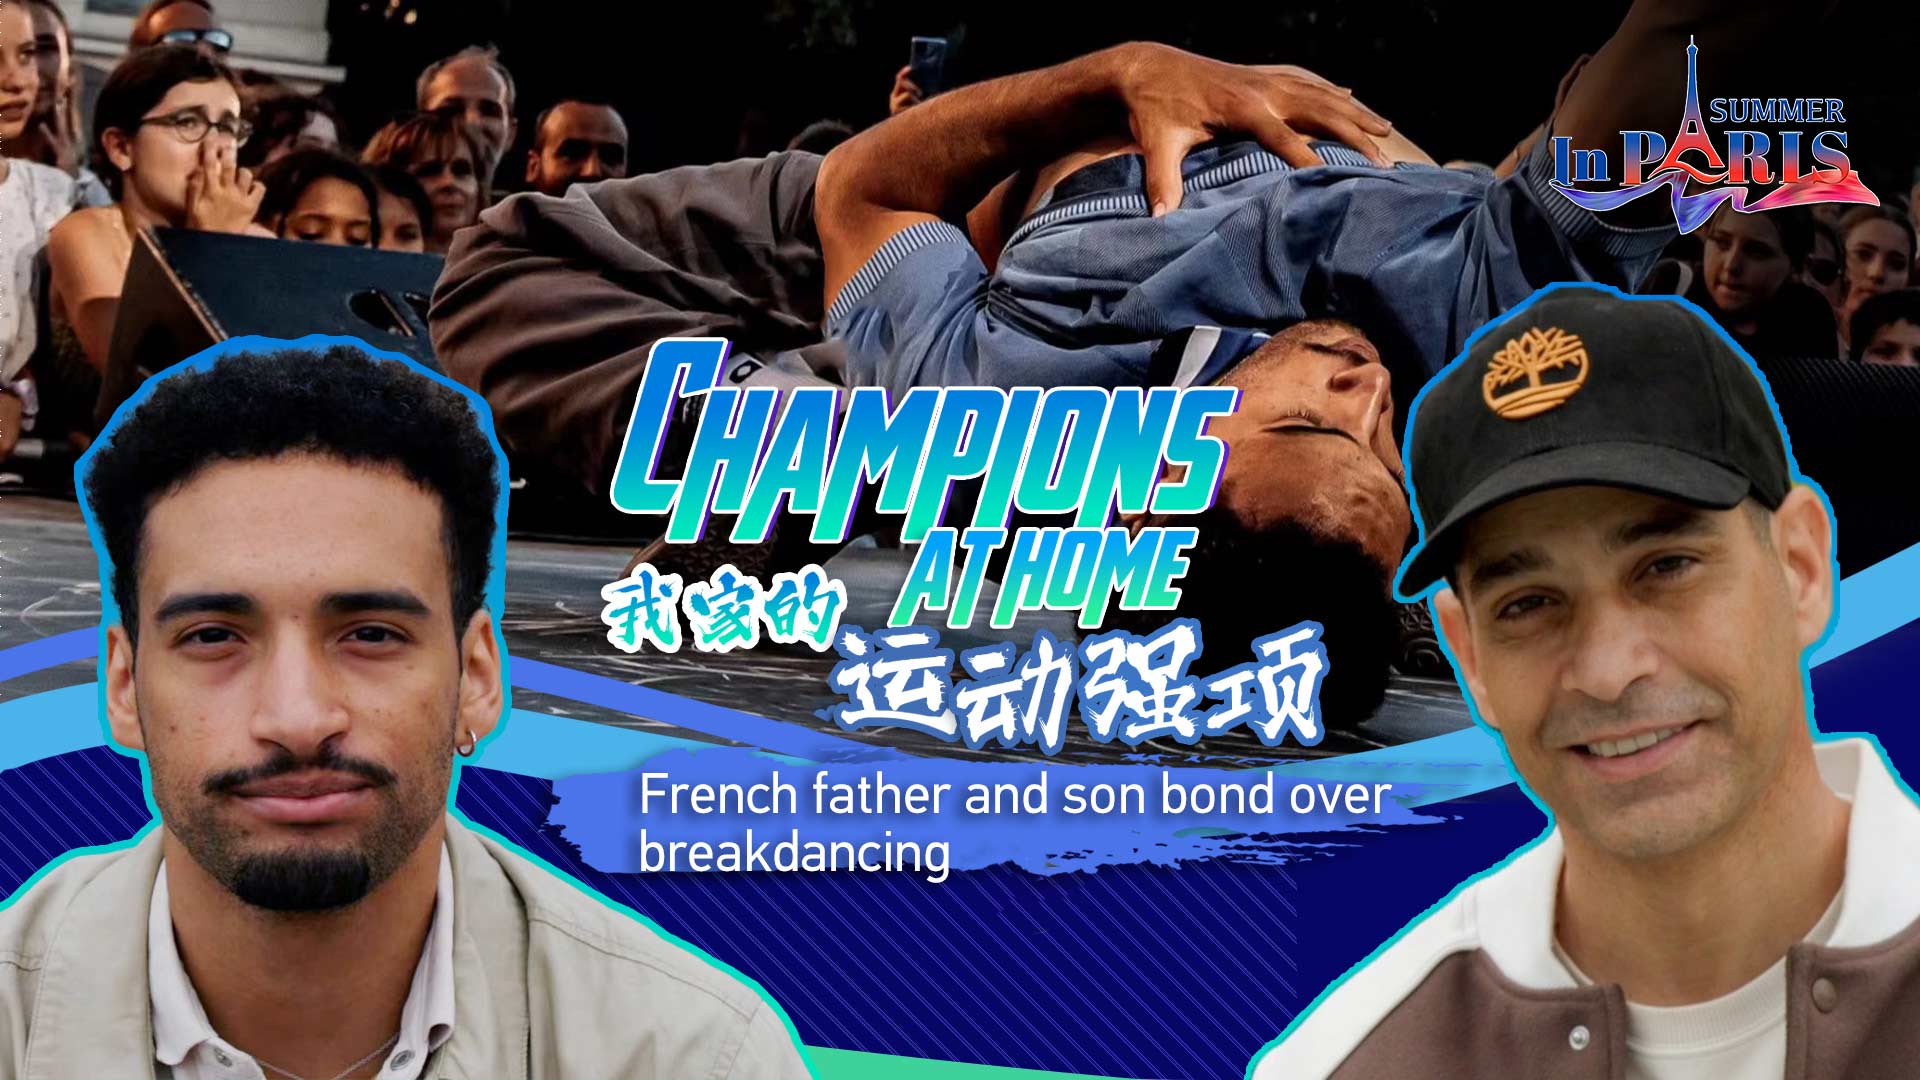 Champions at home: French father and son bond over breakdancing